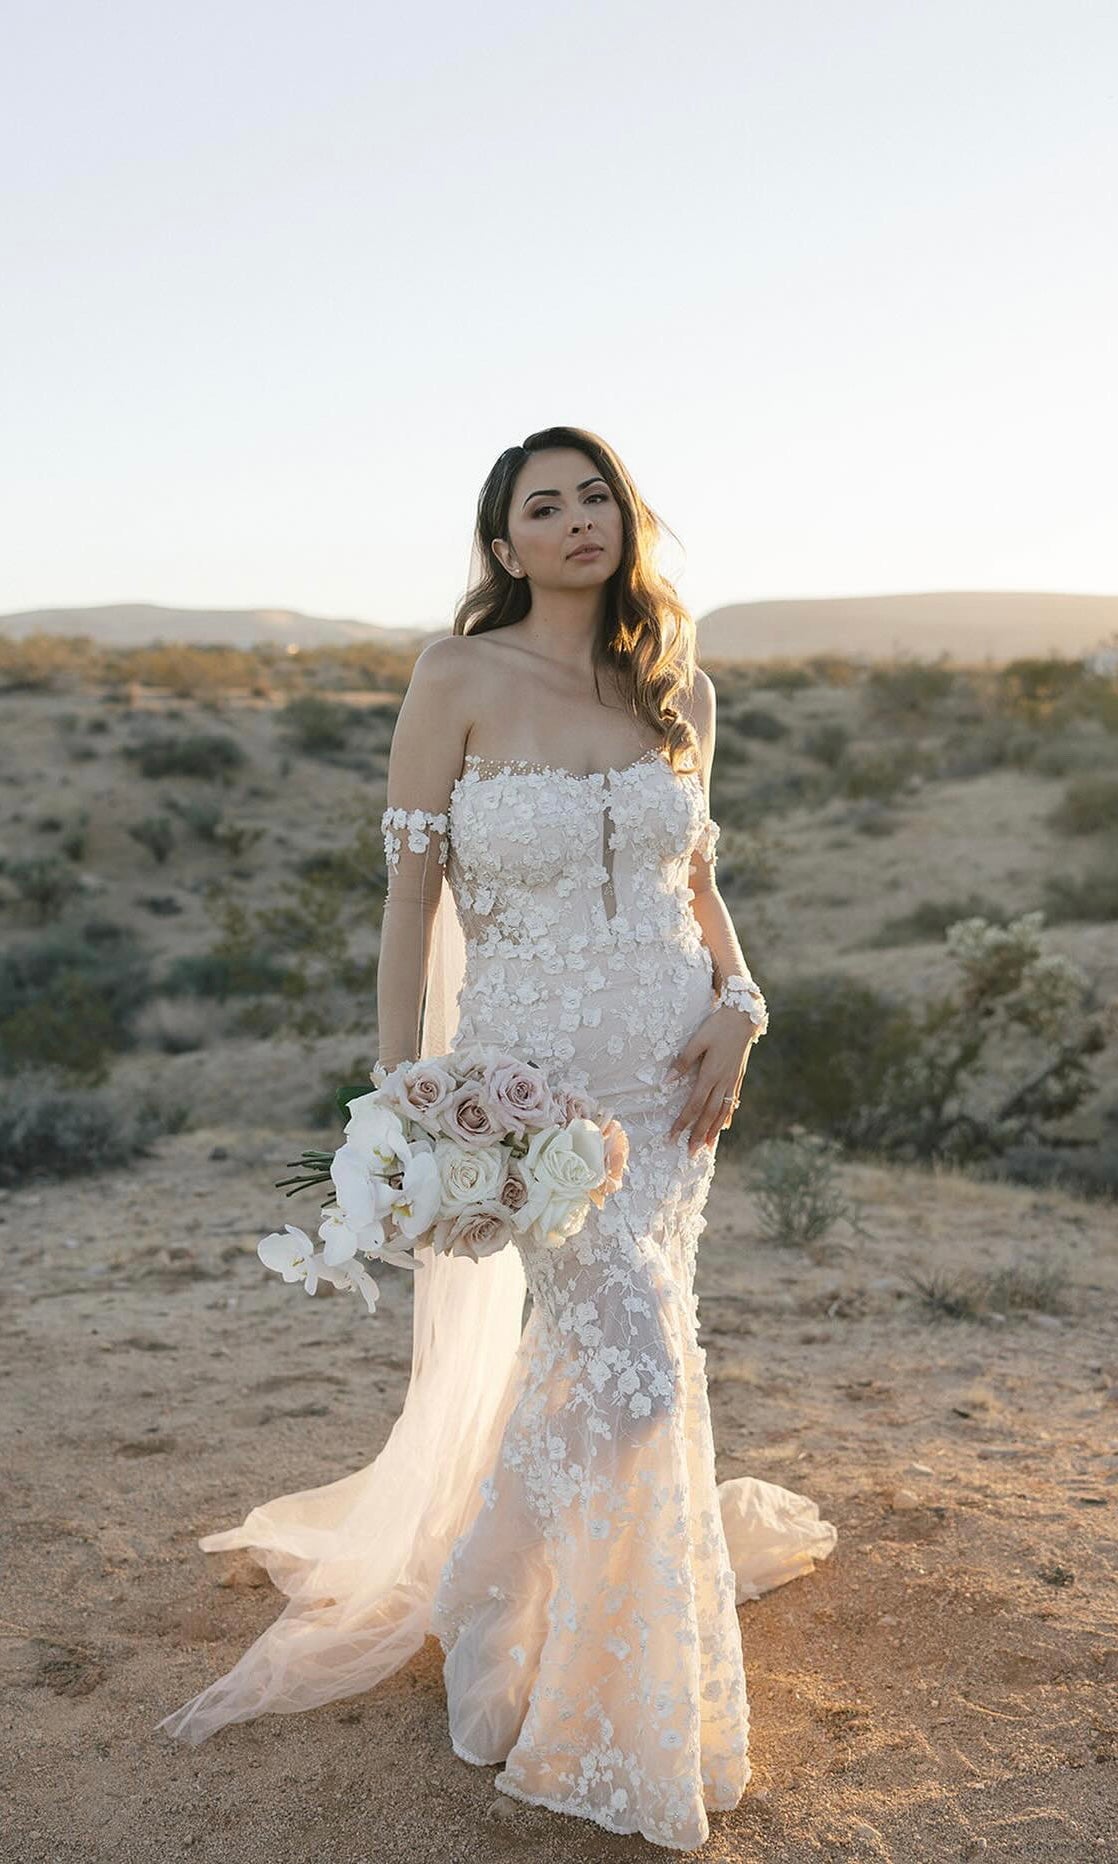 Custom Blush Mermaid Wedding Dress With Long Sleeves, Lace Up Corset Back,  And Belt 2019 Collection From Yuoy, $240.21